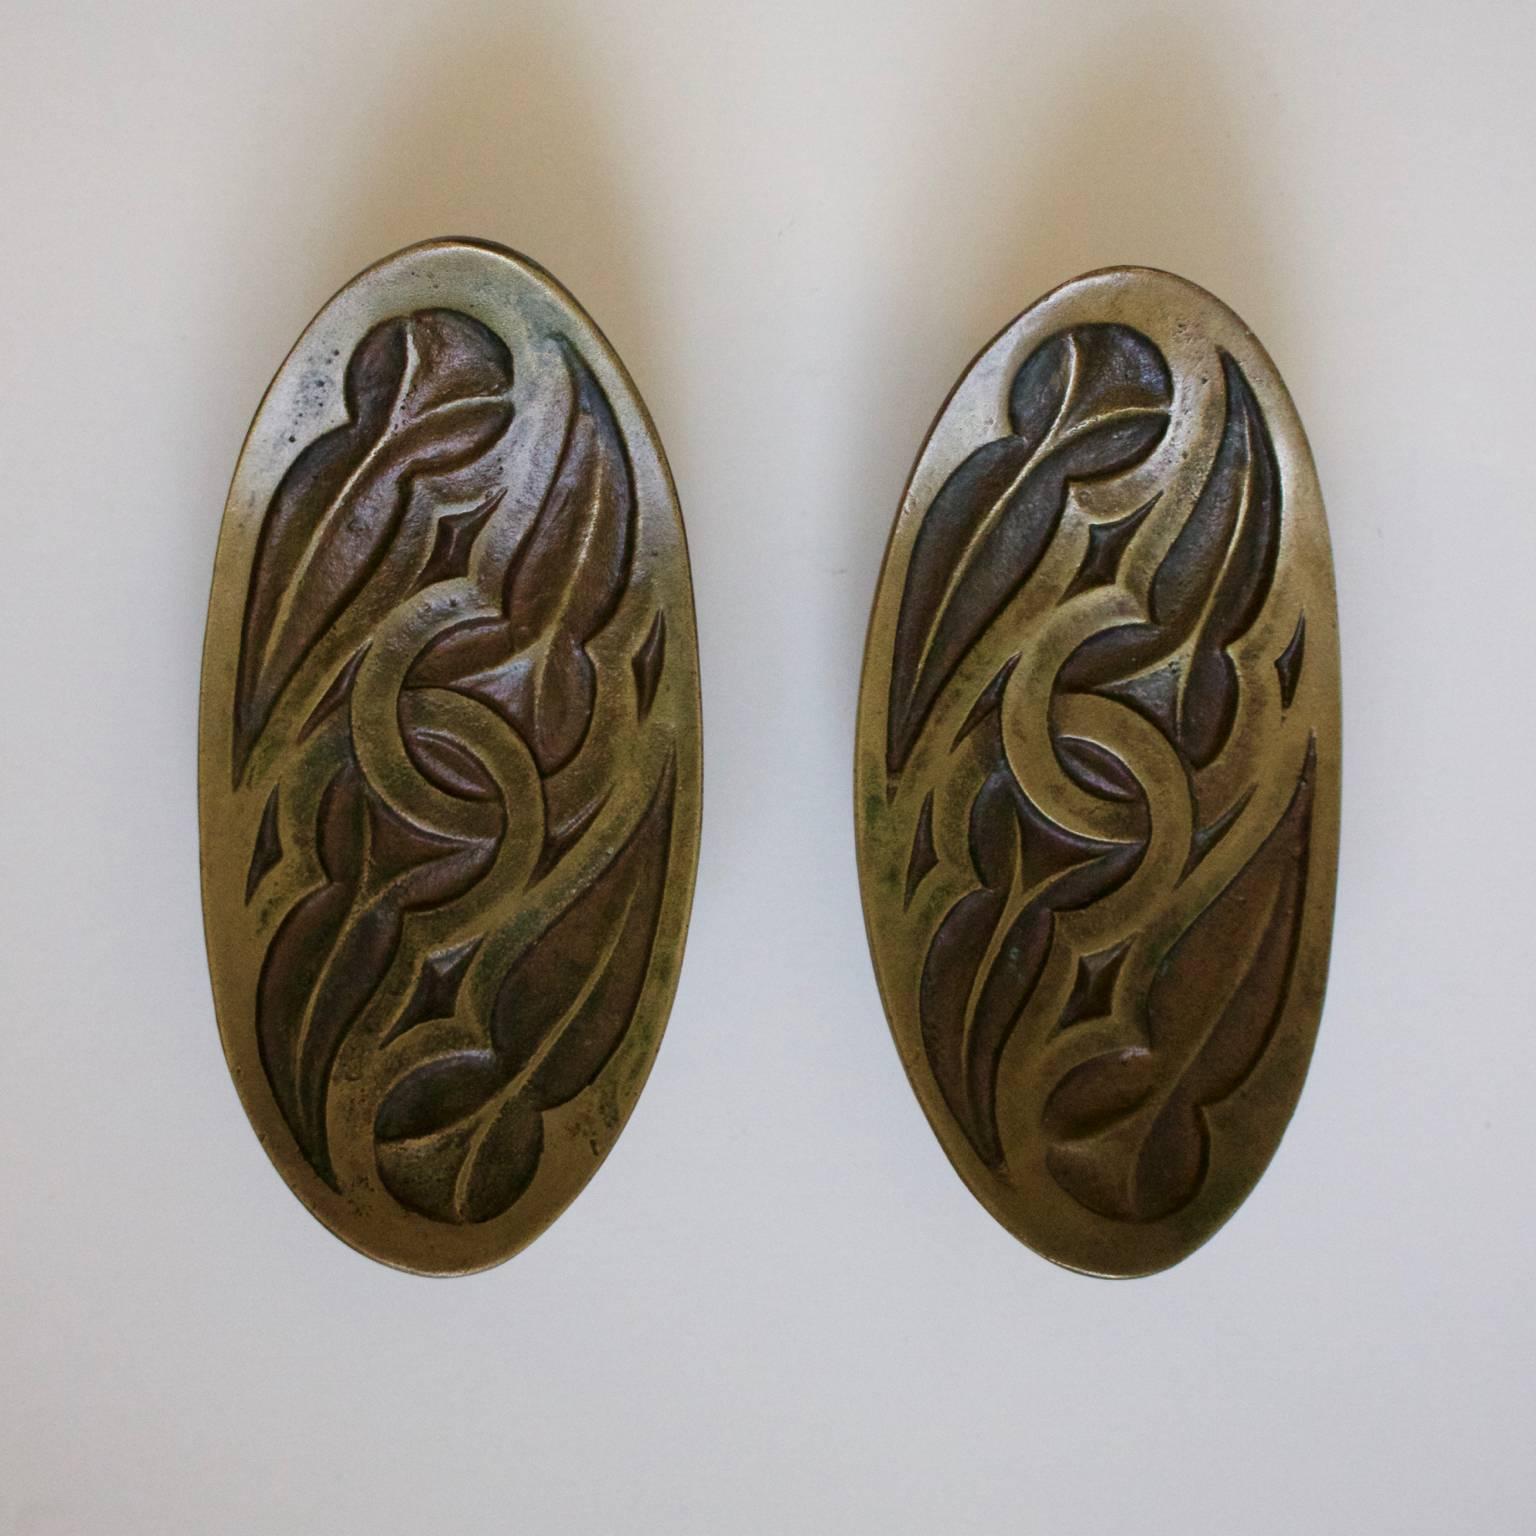 Set of cast bronze door handles in an Art Nouveau or Celtic style. Italian, probably mid-20th century.

Nicely made handles, in very good condition with age-related patina; possibly unused as a rubber spacer which stops the discs rattling around is